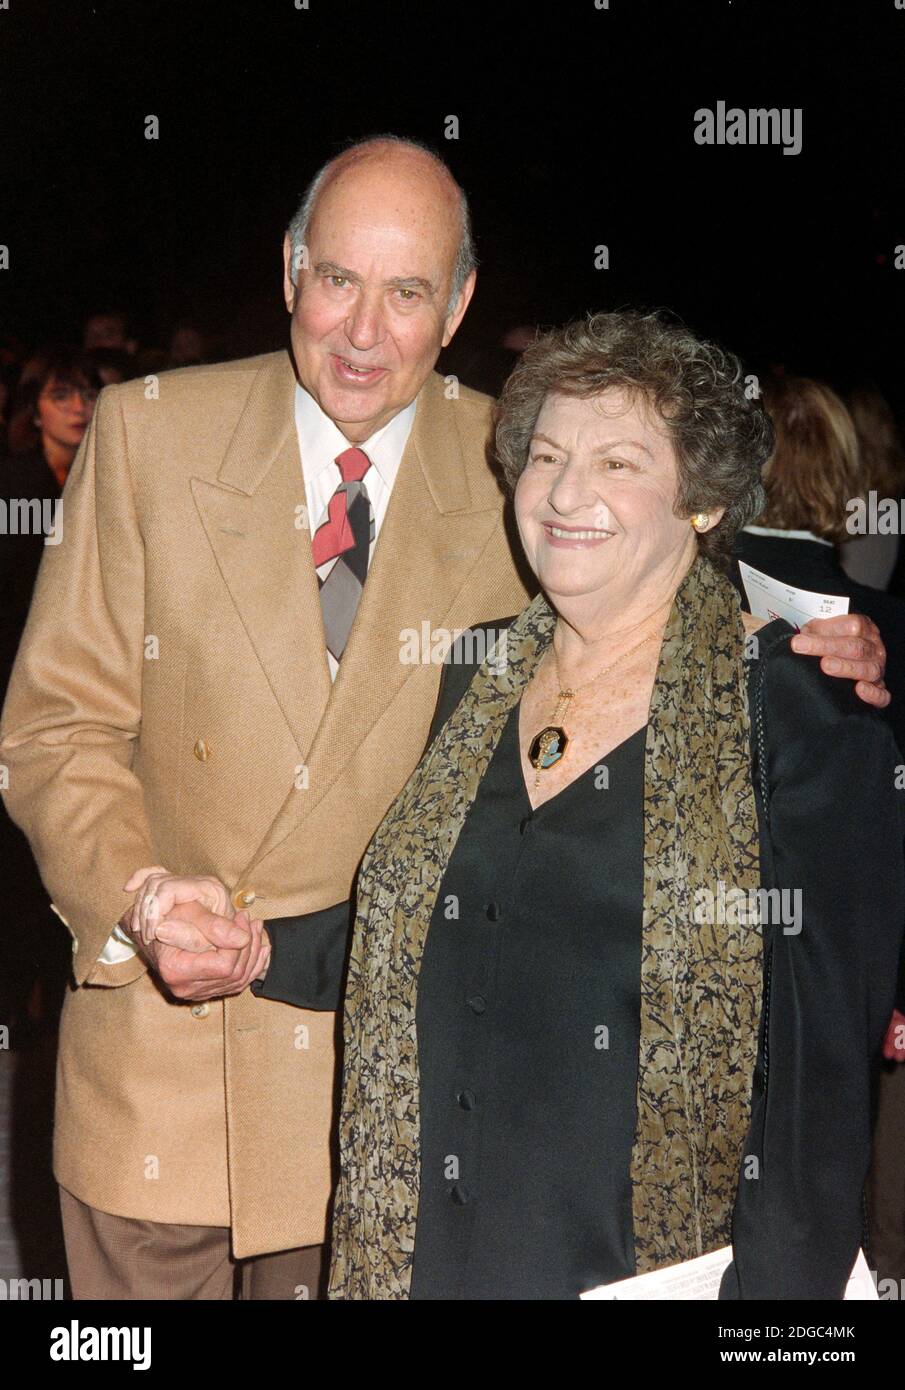 ARCHIVE: LOS ANGELES, CA. October 30, 1995: Director Carl Reiner & wife Estelle Reiner at the premiere of 'Home for the Holidays' in Los Angeles. File photo © Paul Smith/Featureflash Stock Photo